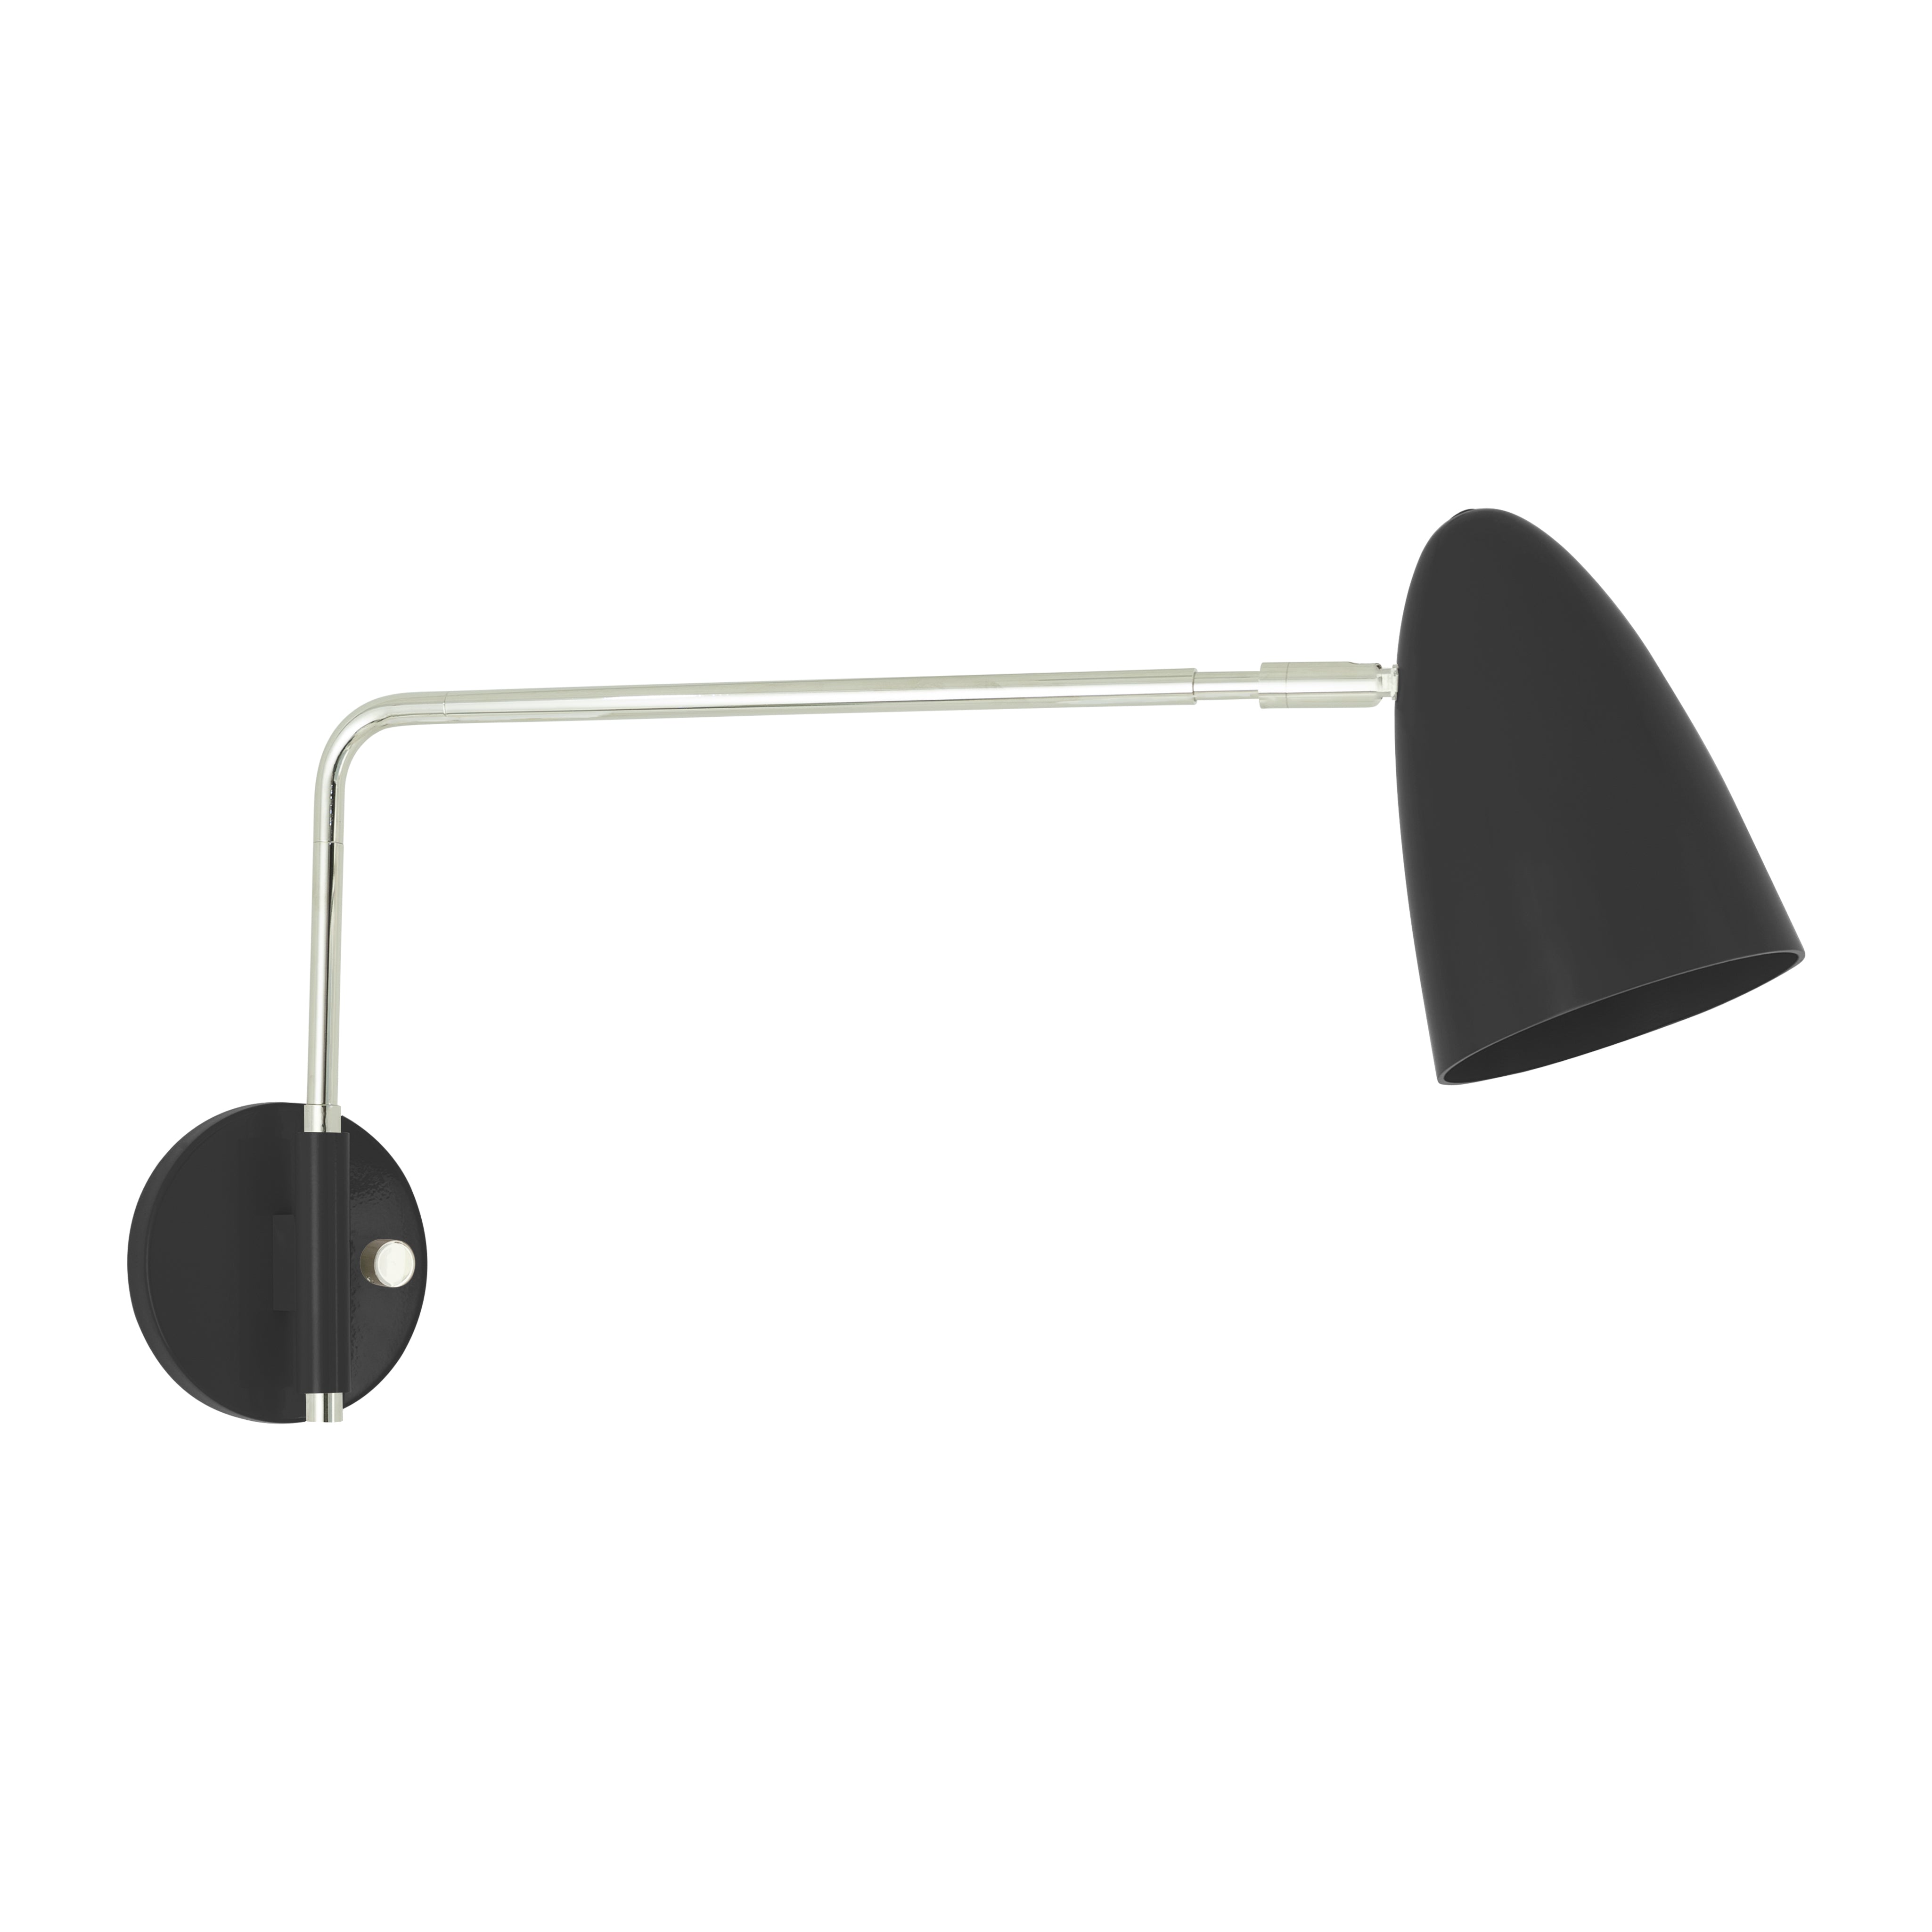 Nickel and black color Boom Swing Arm sconce Dutton Brown lighting